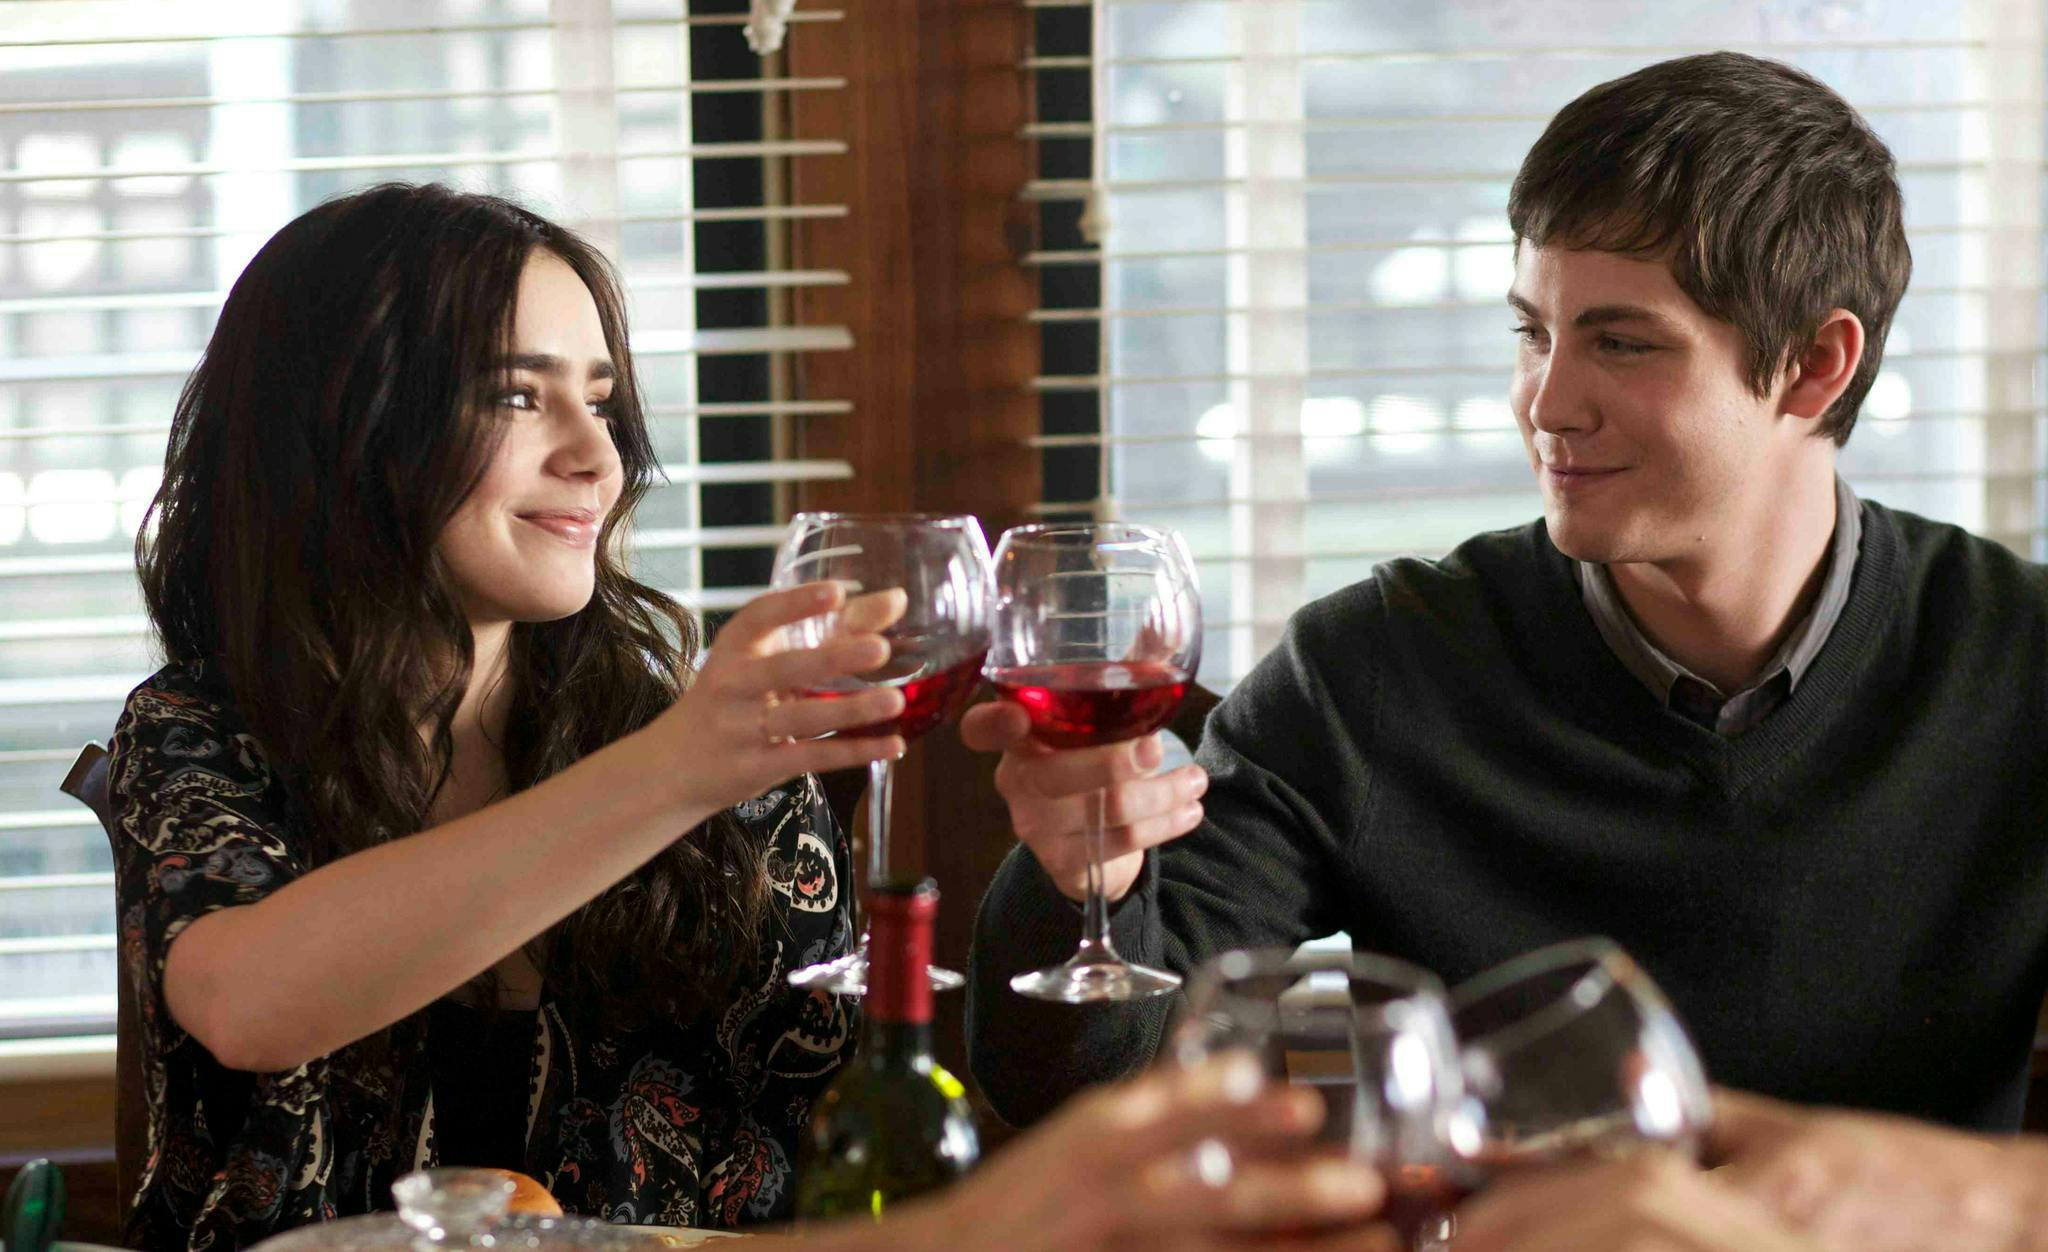 Film "Stuck in Love" con Lily Collins e Logan Lerman photo by Getty Images